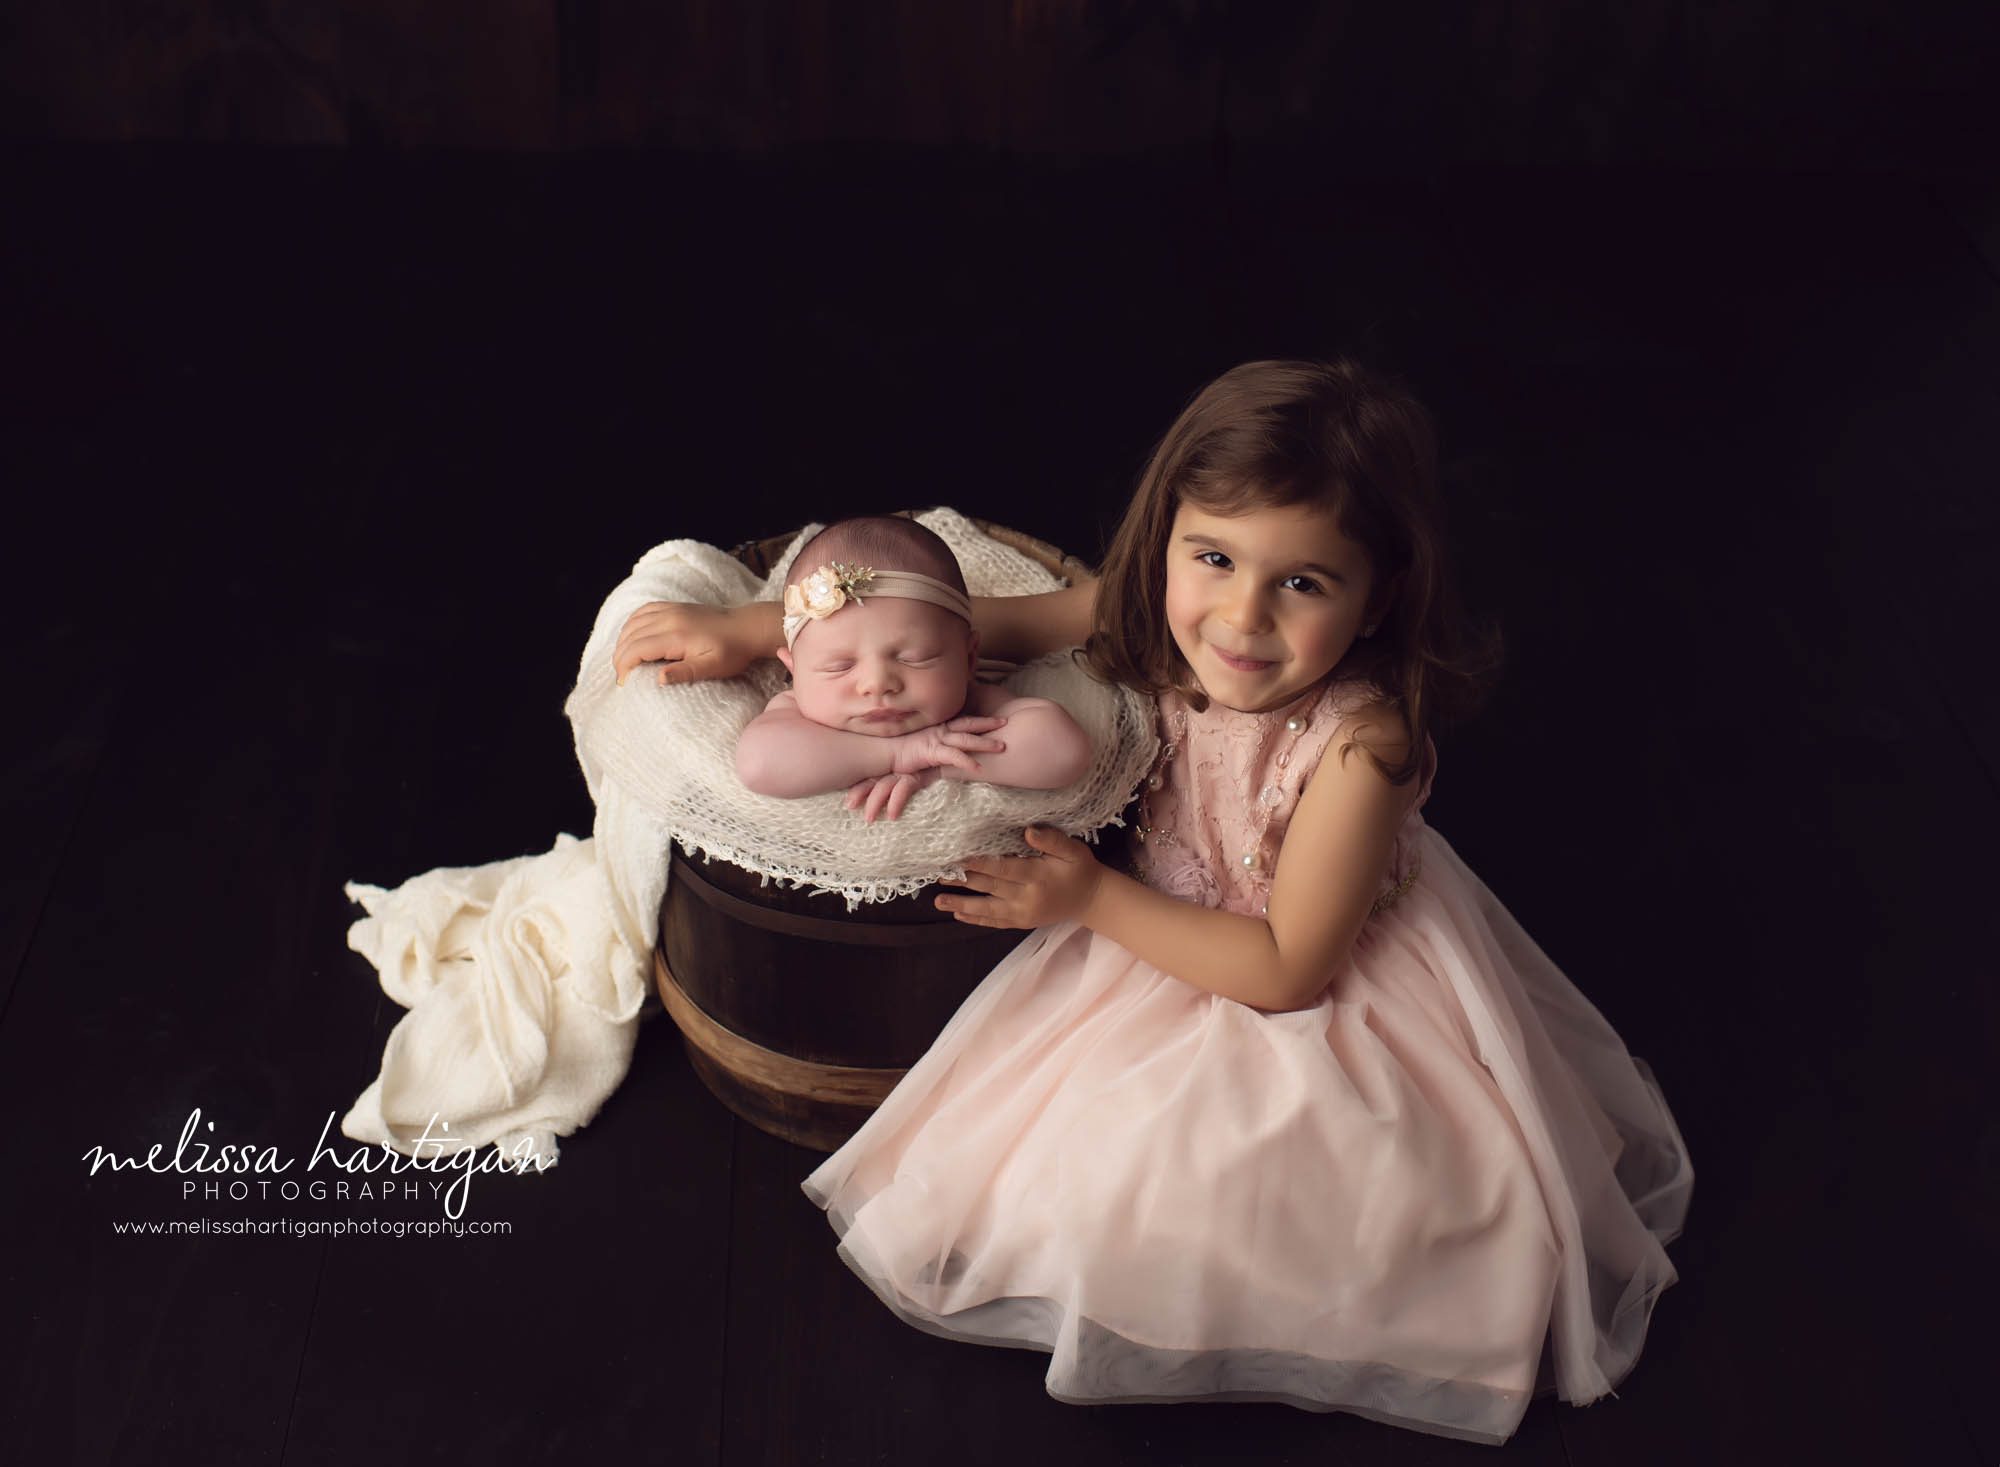 Baby girl posed in bucket with older sister sitting beside her